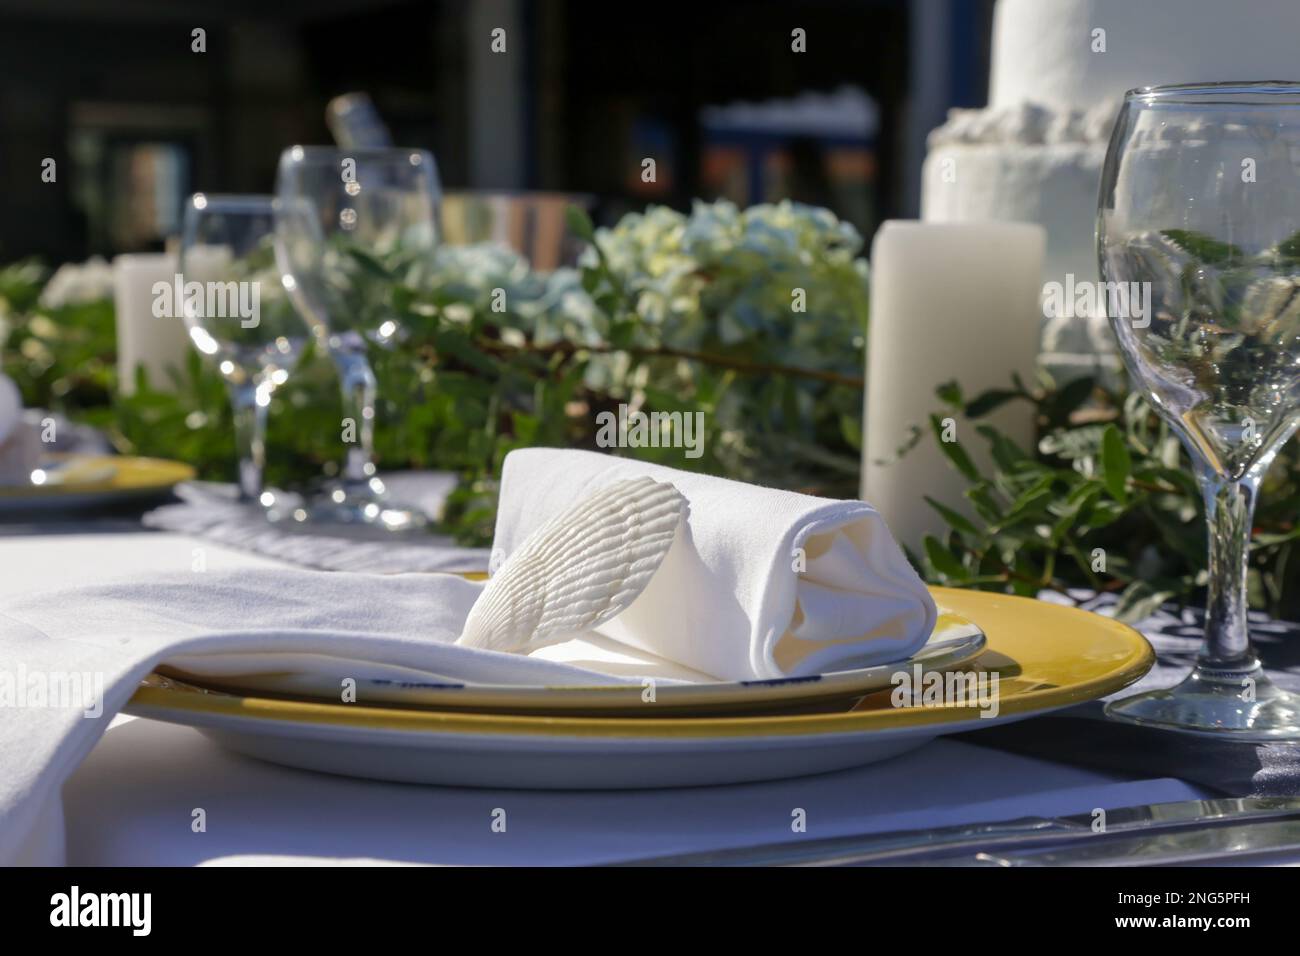 https://c8.alamy.com/comp/2NG5PFH/elegant-table-setting-decorated-with-green-leaves-boho-inspired-centerpiece-shells-and-white-linen-cloth-for-a-engagement-party-wedding-reception-or-2NG5PFH.jpg